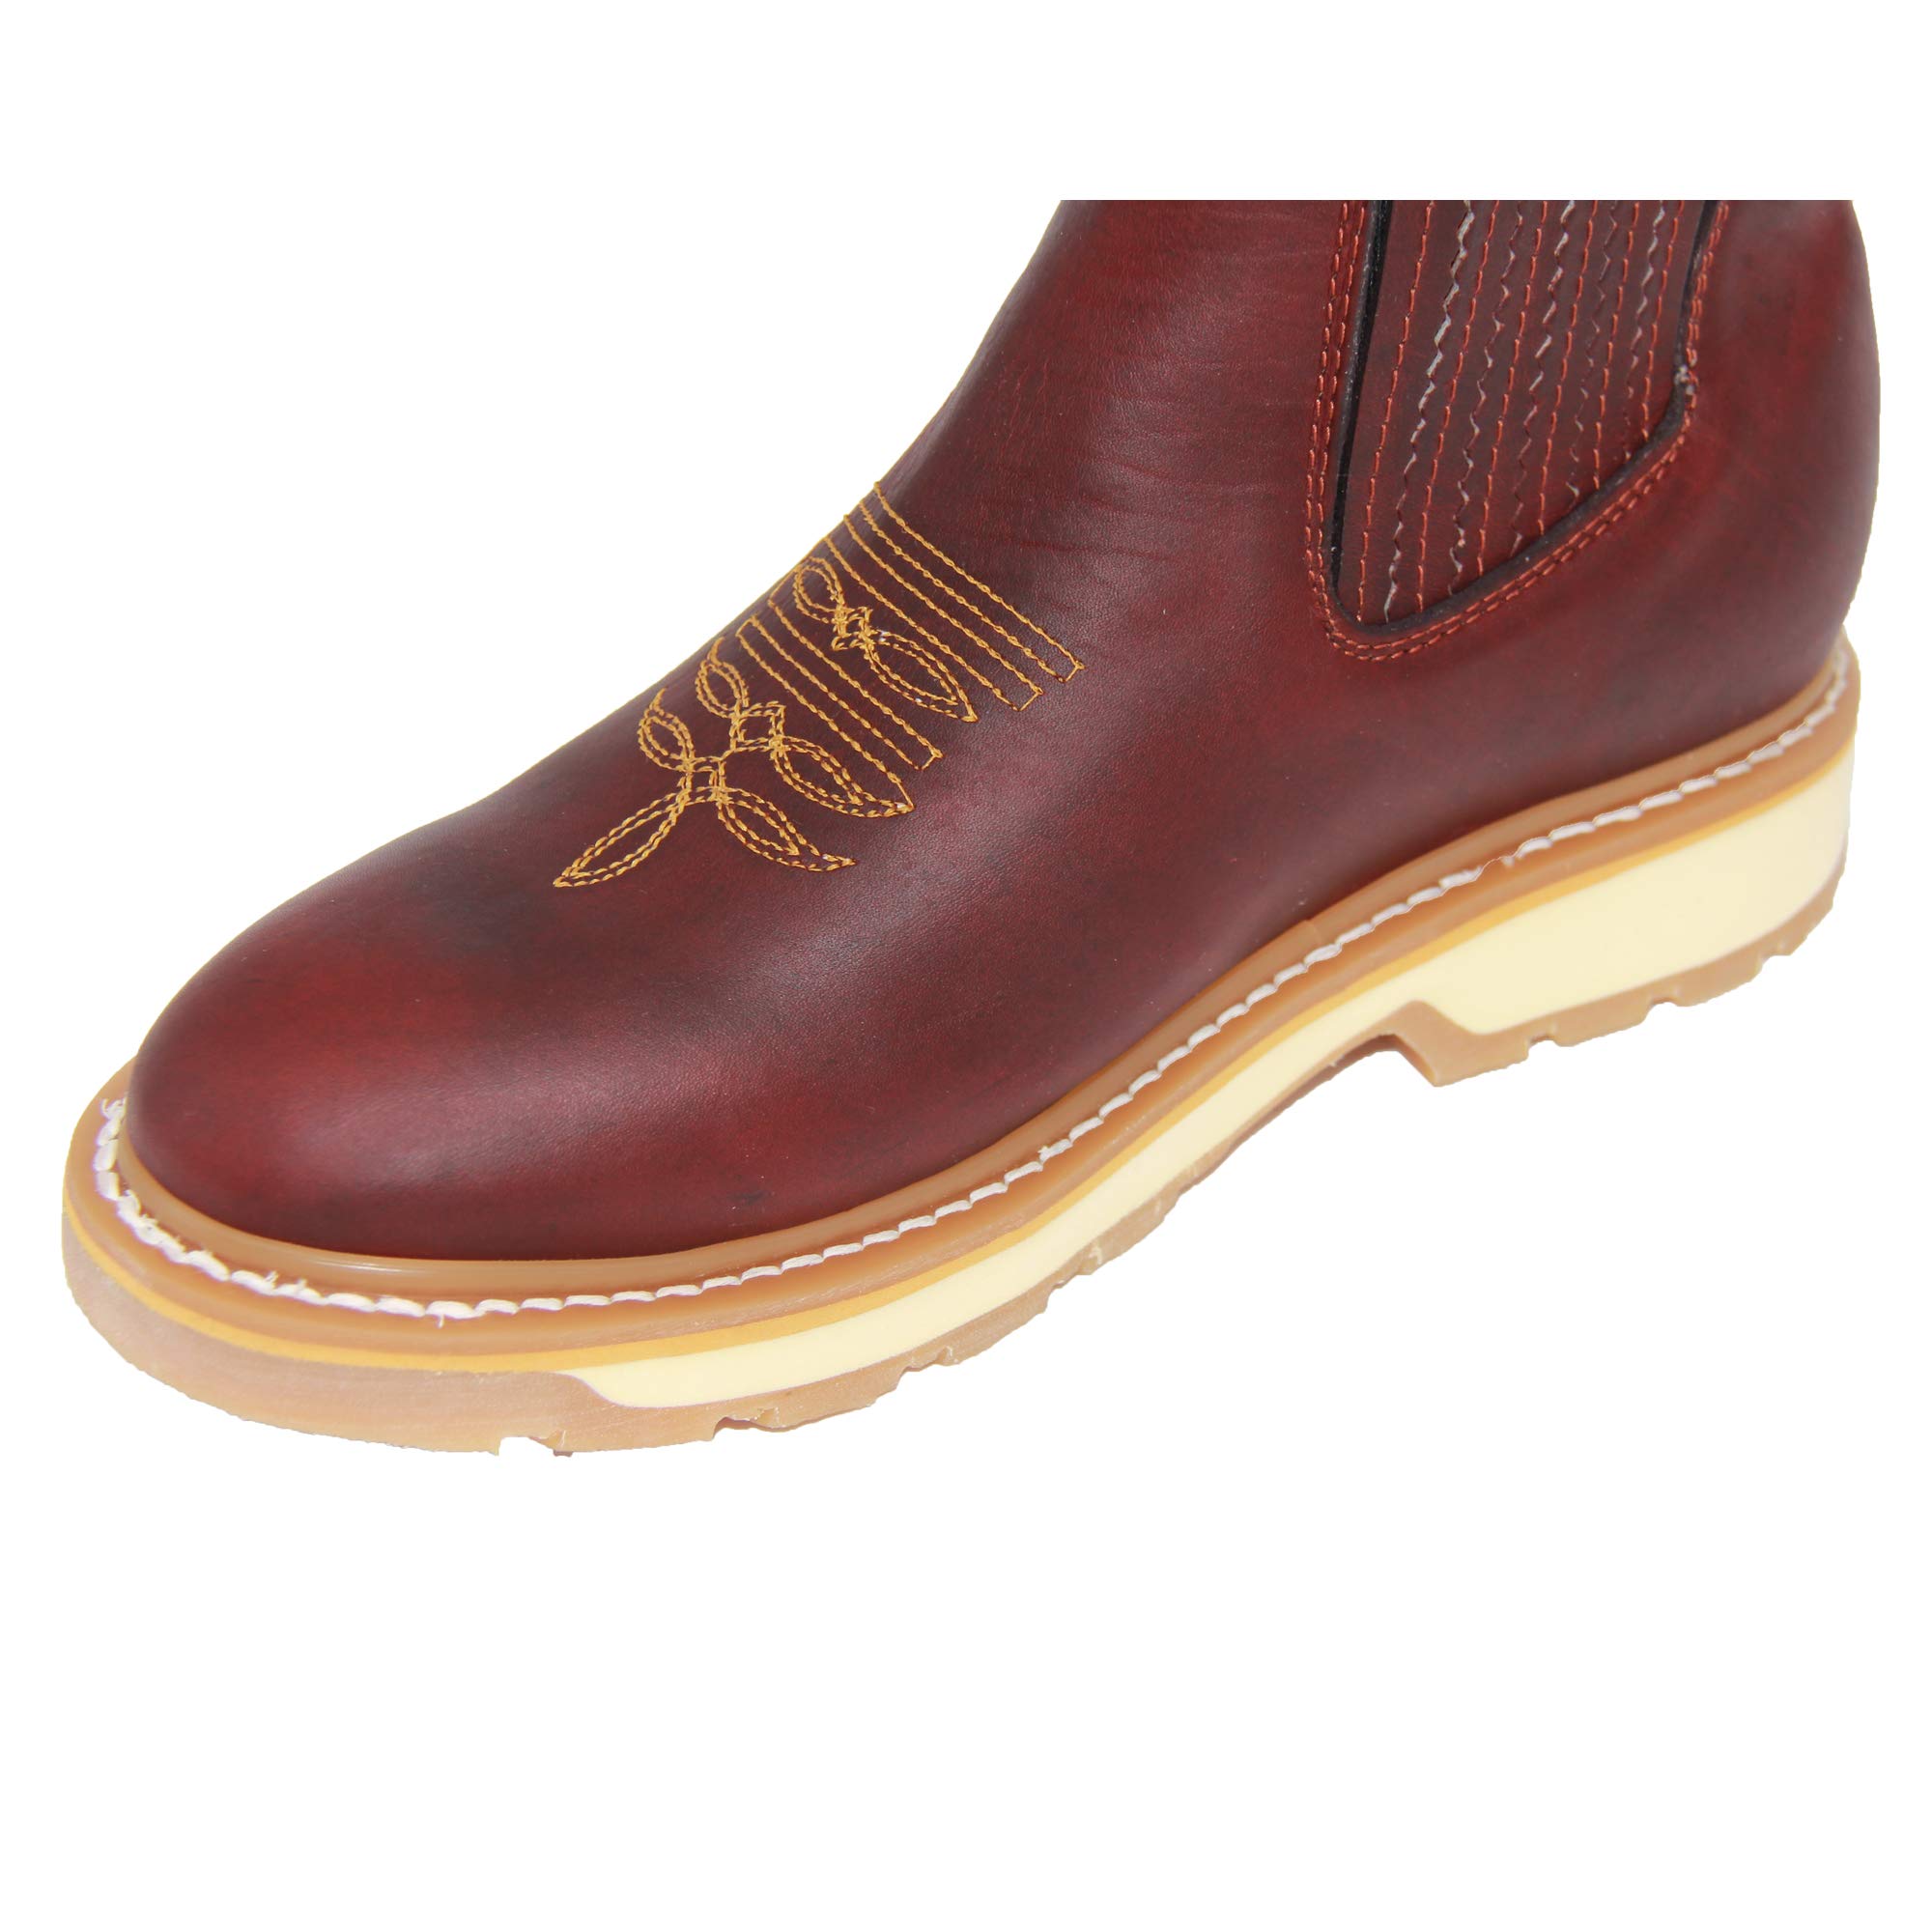 The Western Shops Leather Short Ankle Soft Toe Work Boot - image 3 of 4